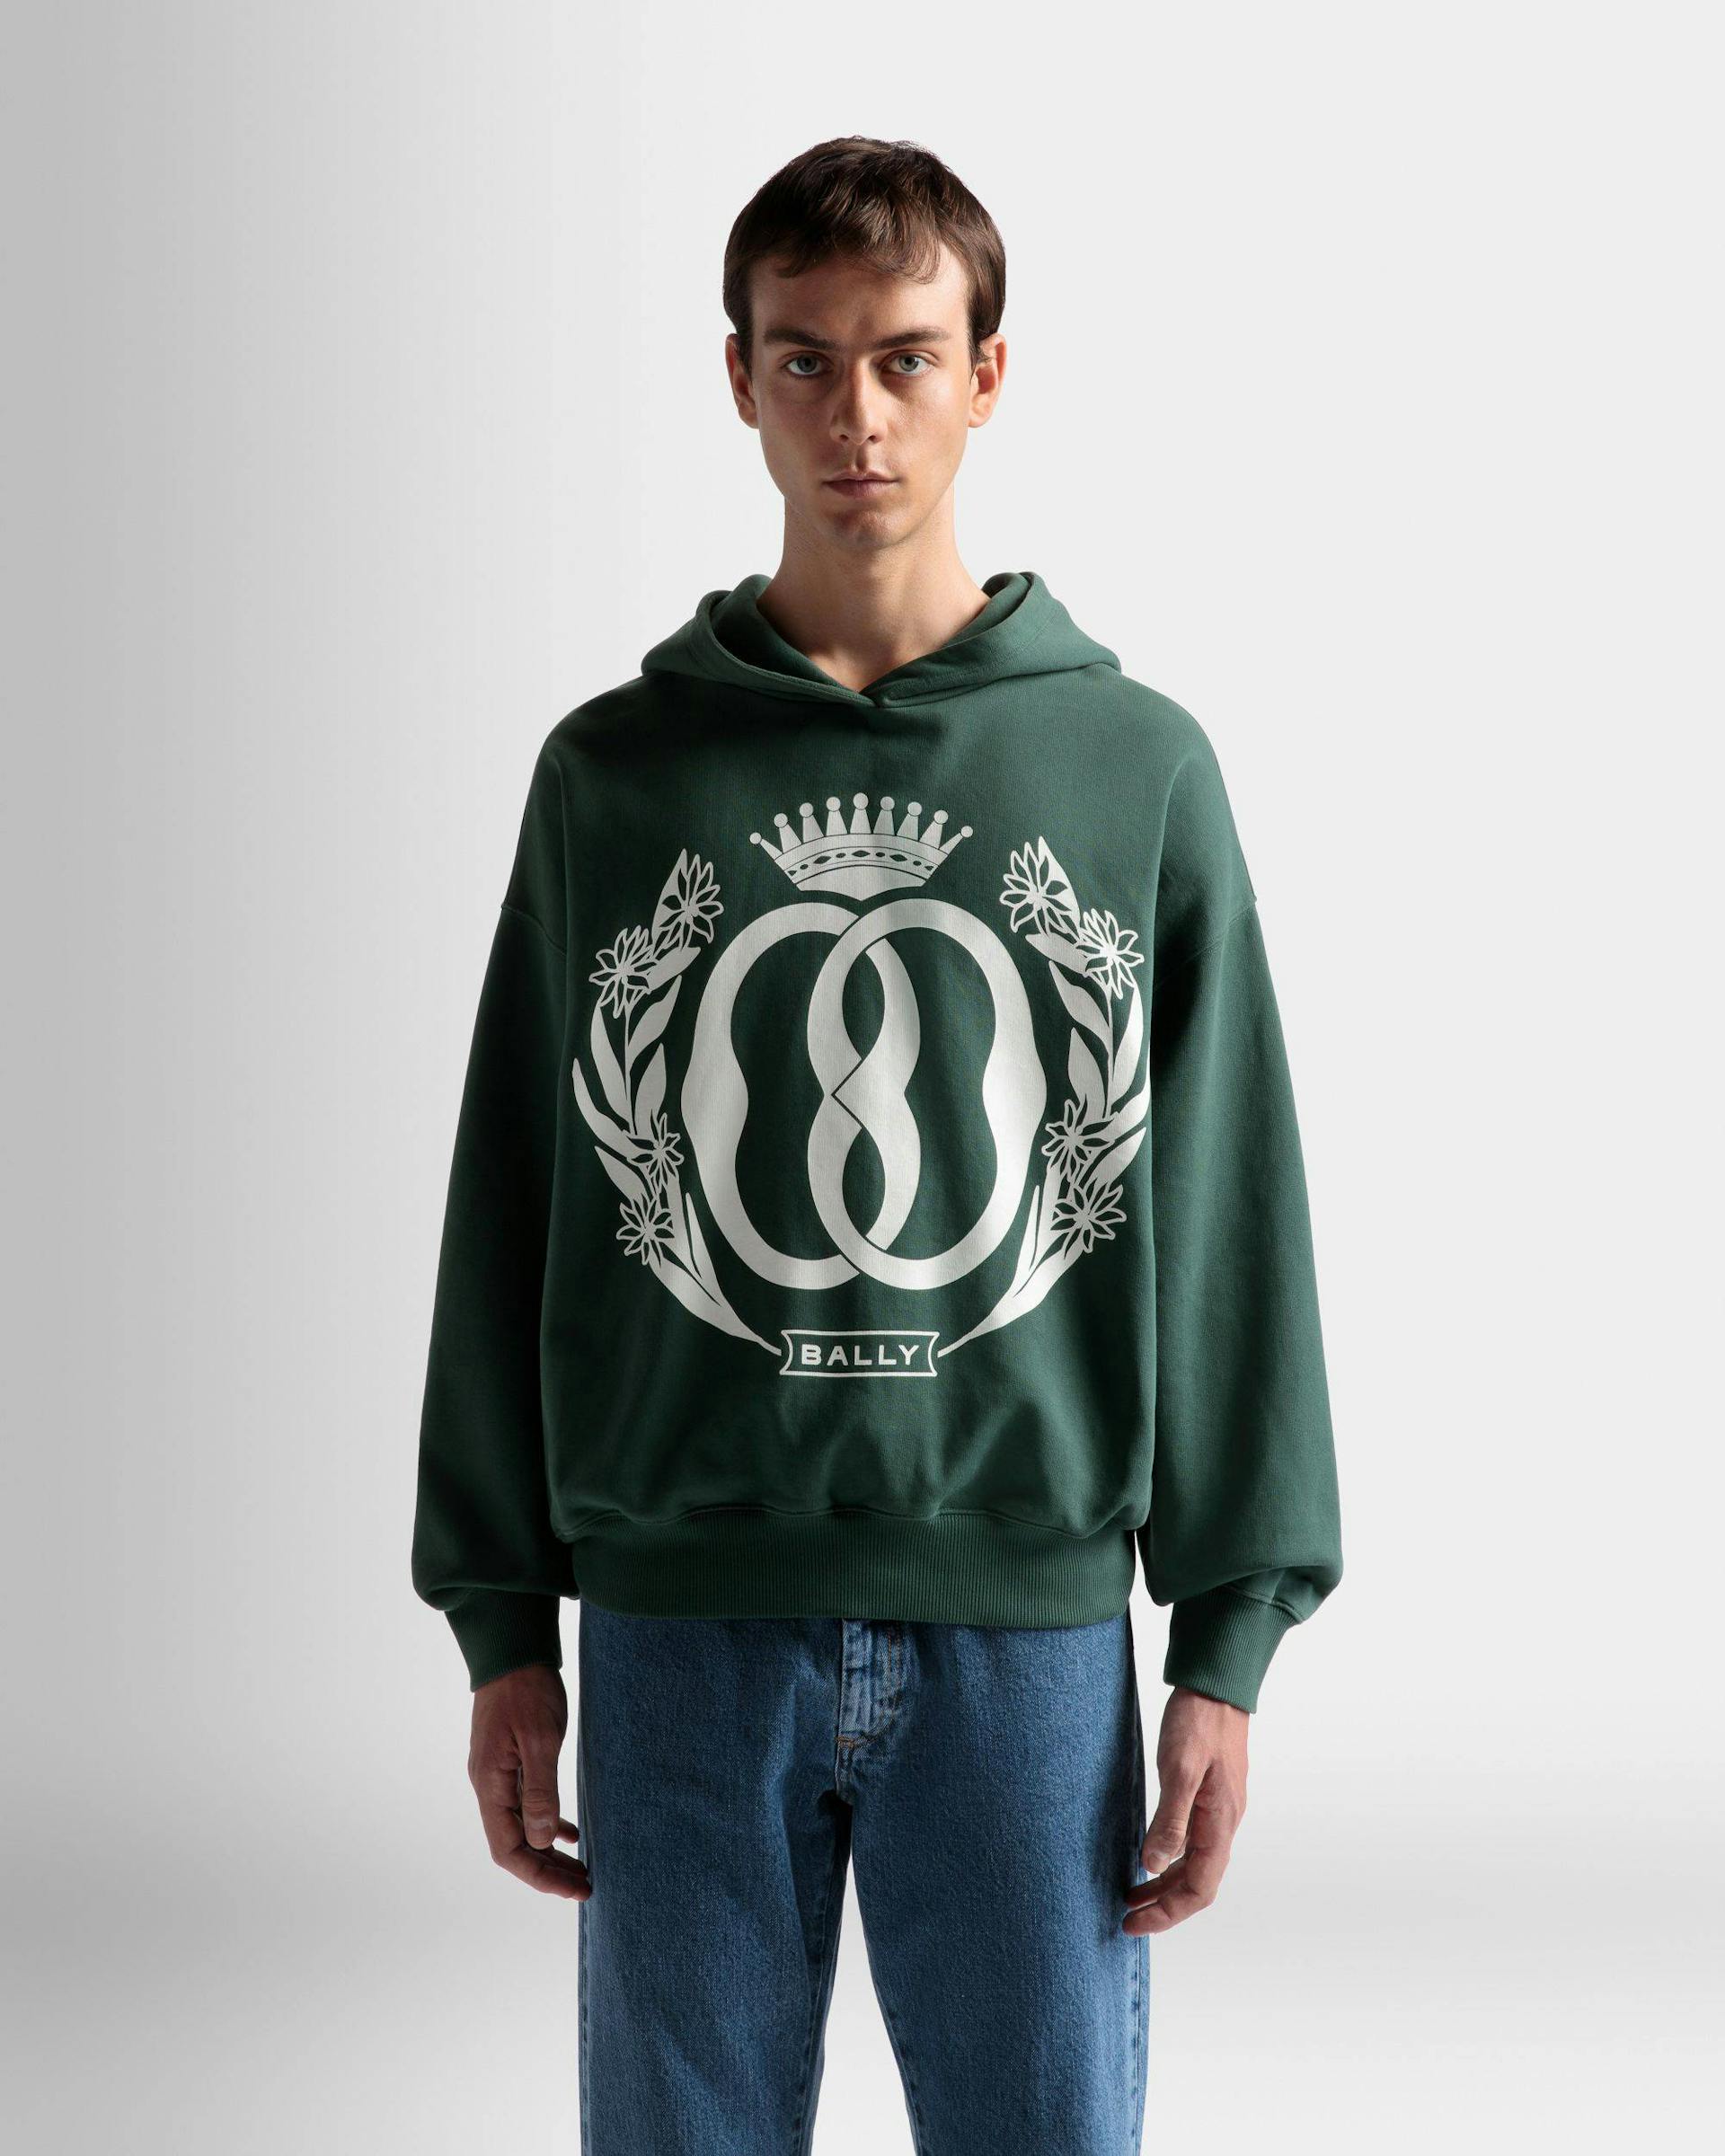 Men's Foiled Hooded Sweatshirt In Kelly Green Cotton | Bally | On Model Close Up